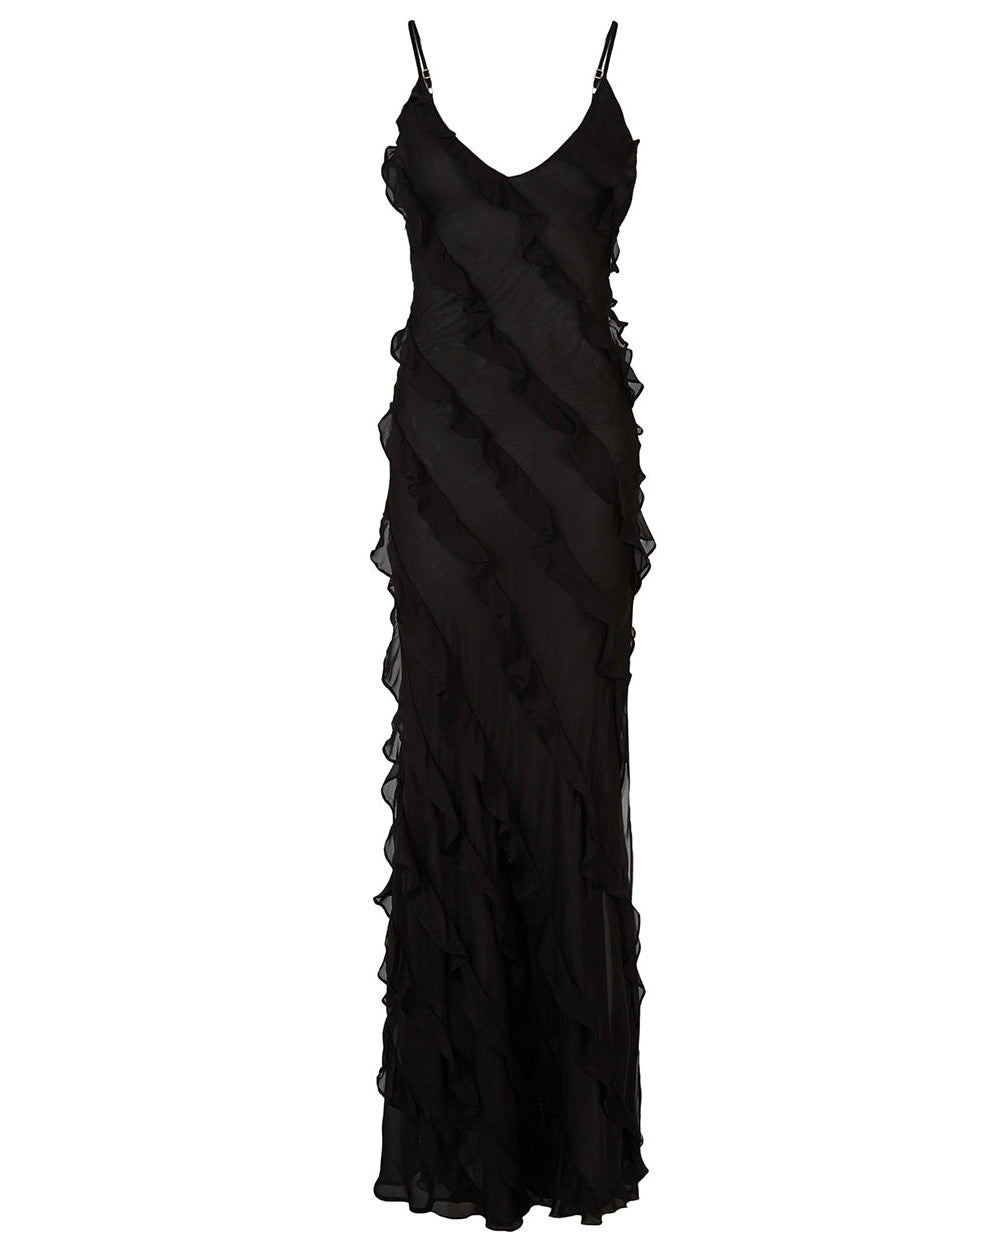 Backless Maxi Dress with High Slit and Ruffle Hem